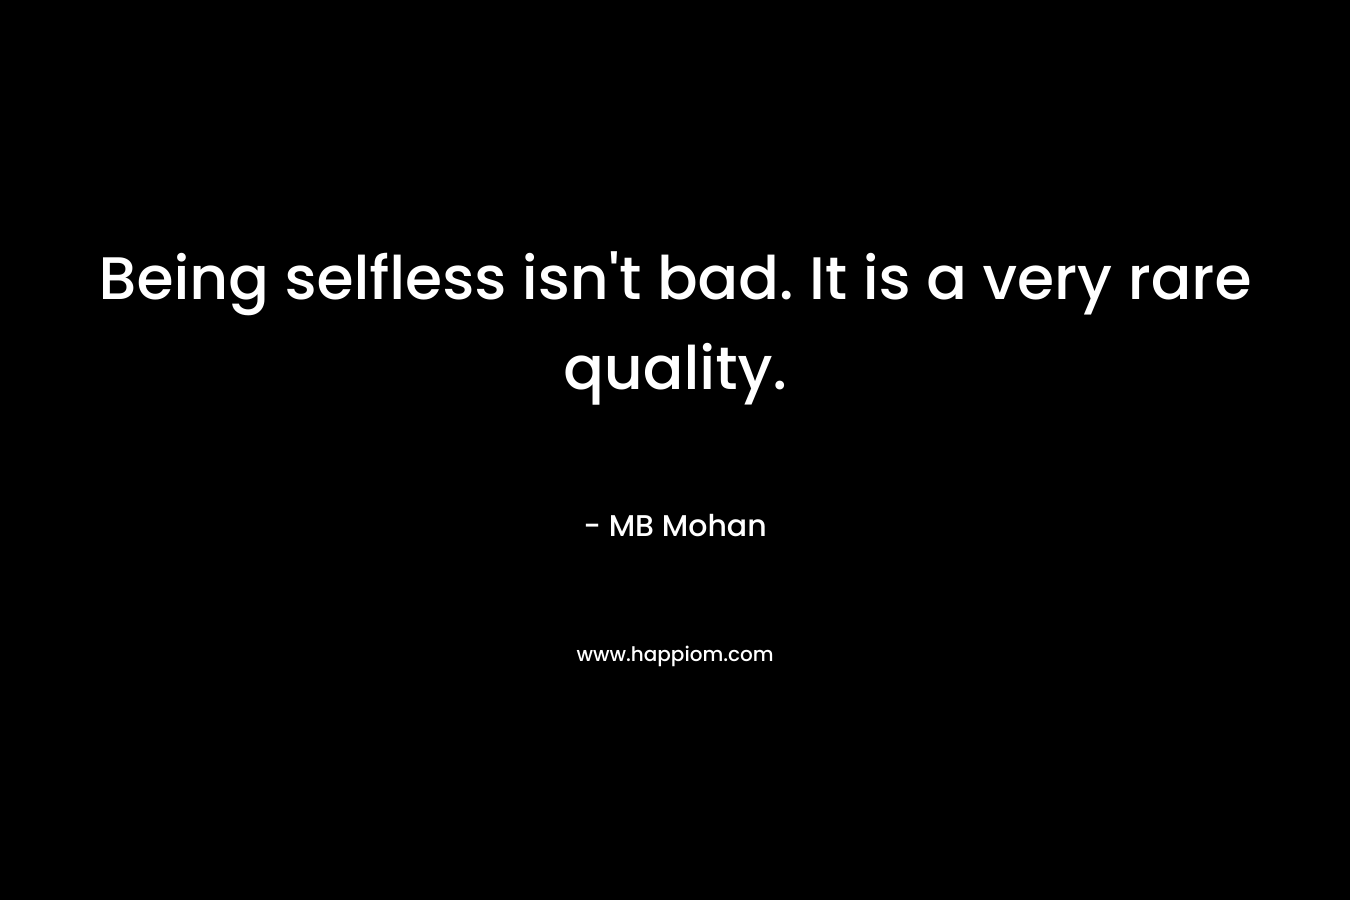 Being selfless isn’t bad. It is a very rare quality. – MB Mohan